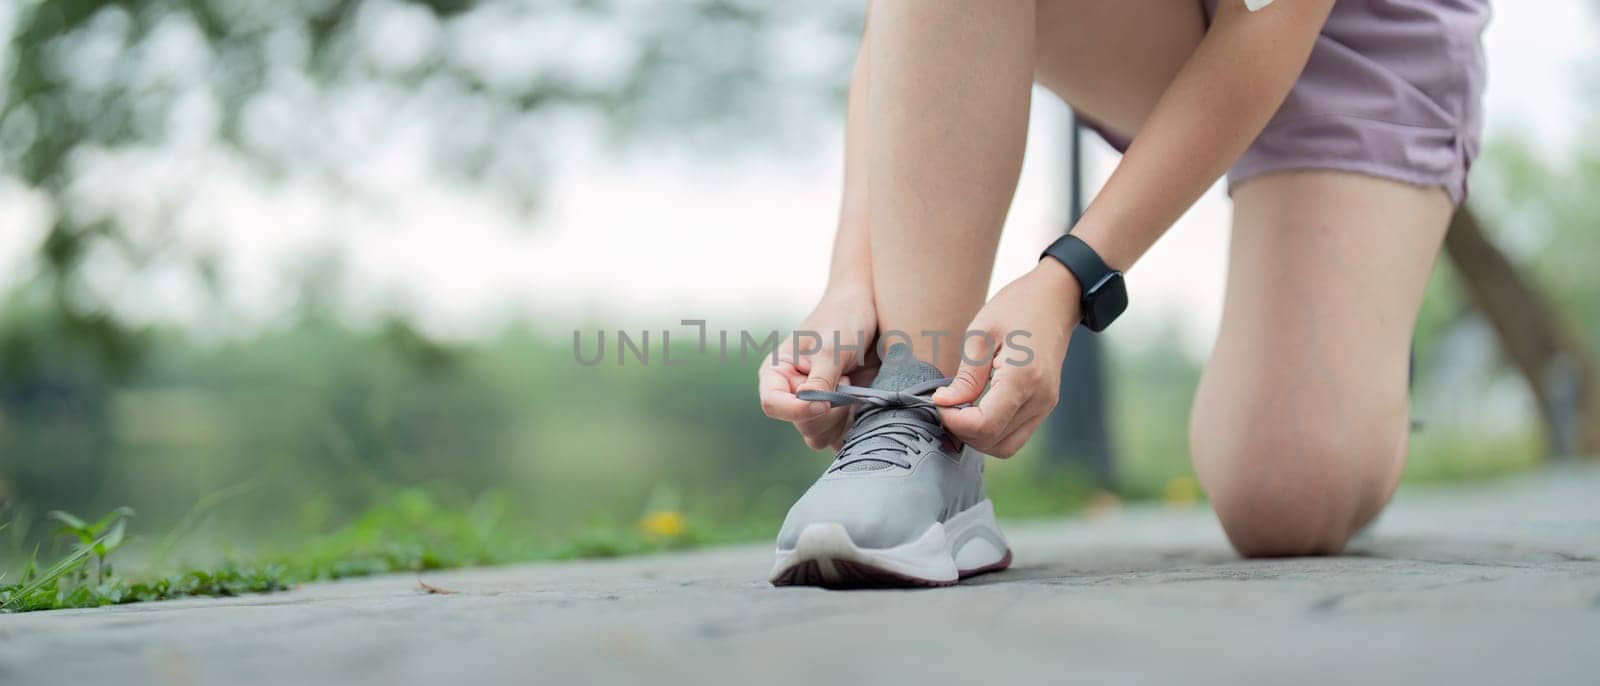 Young woman tying shoelace in the park. Sport and fitness concept by nateemee